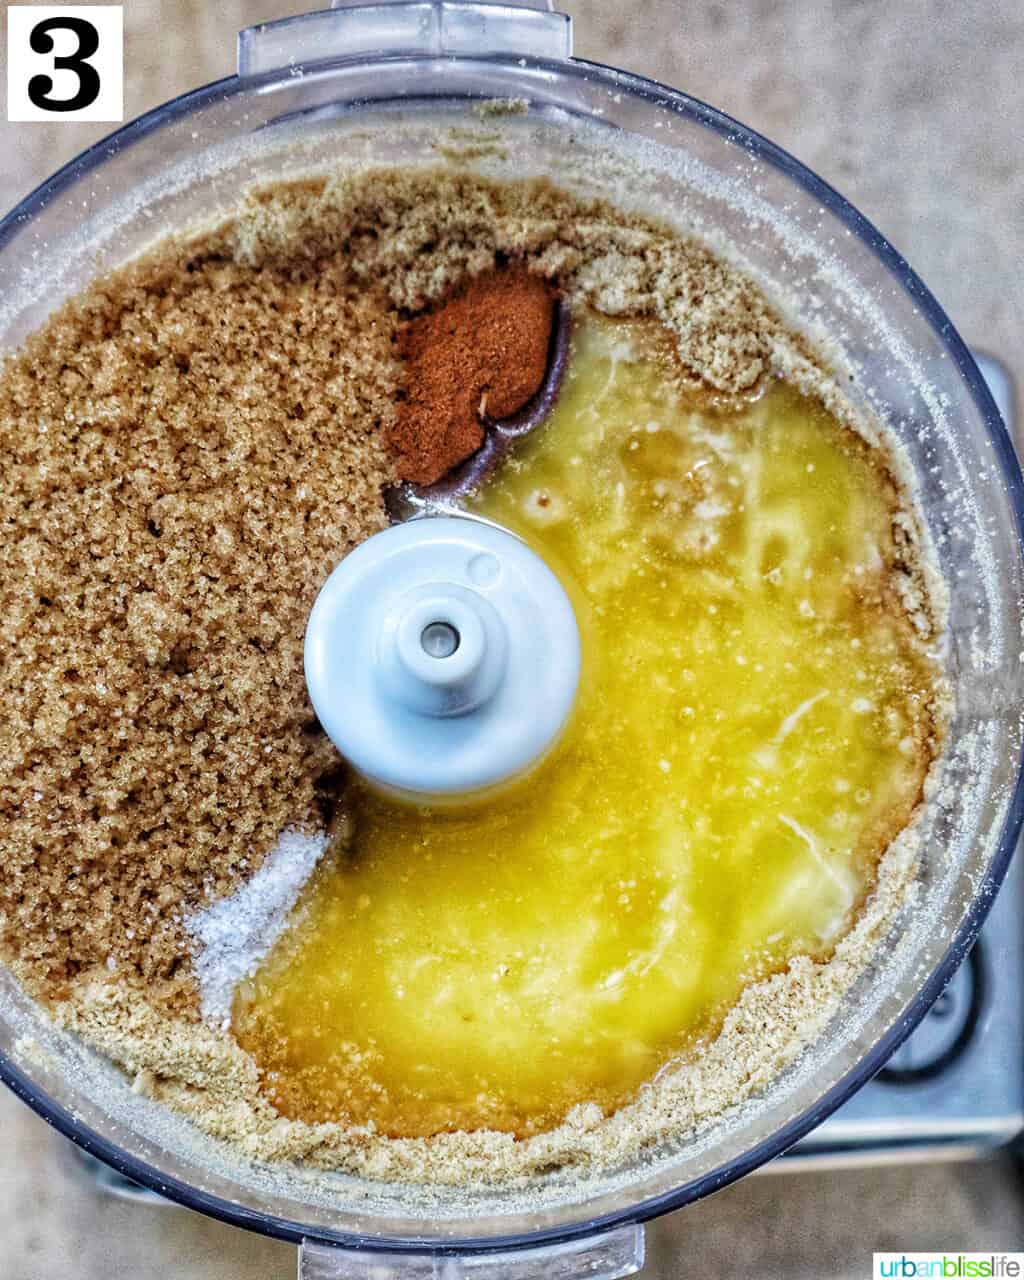 melted butter, graham cracker crumbles, and spices in a food processor.